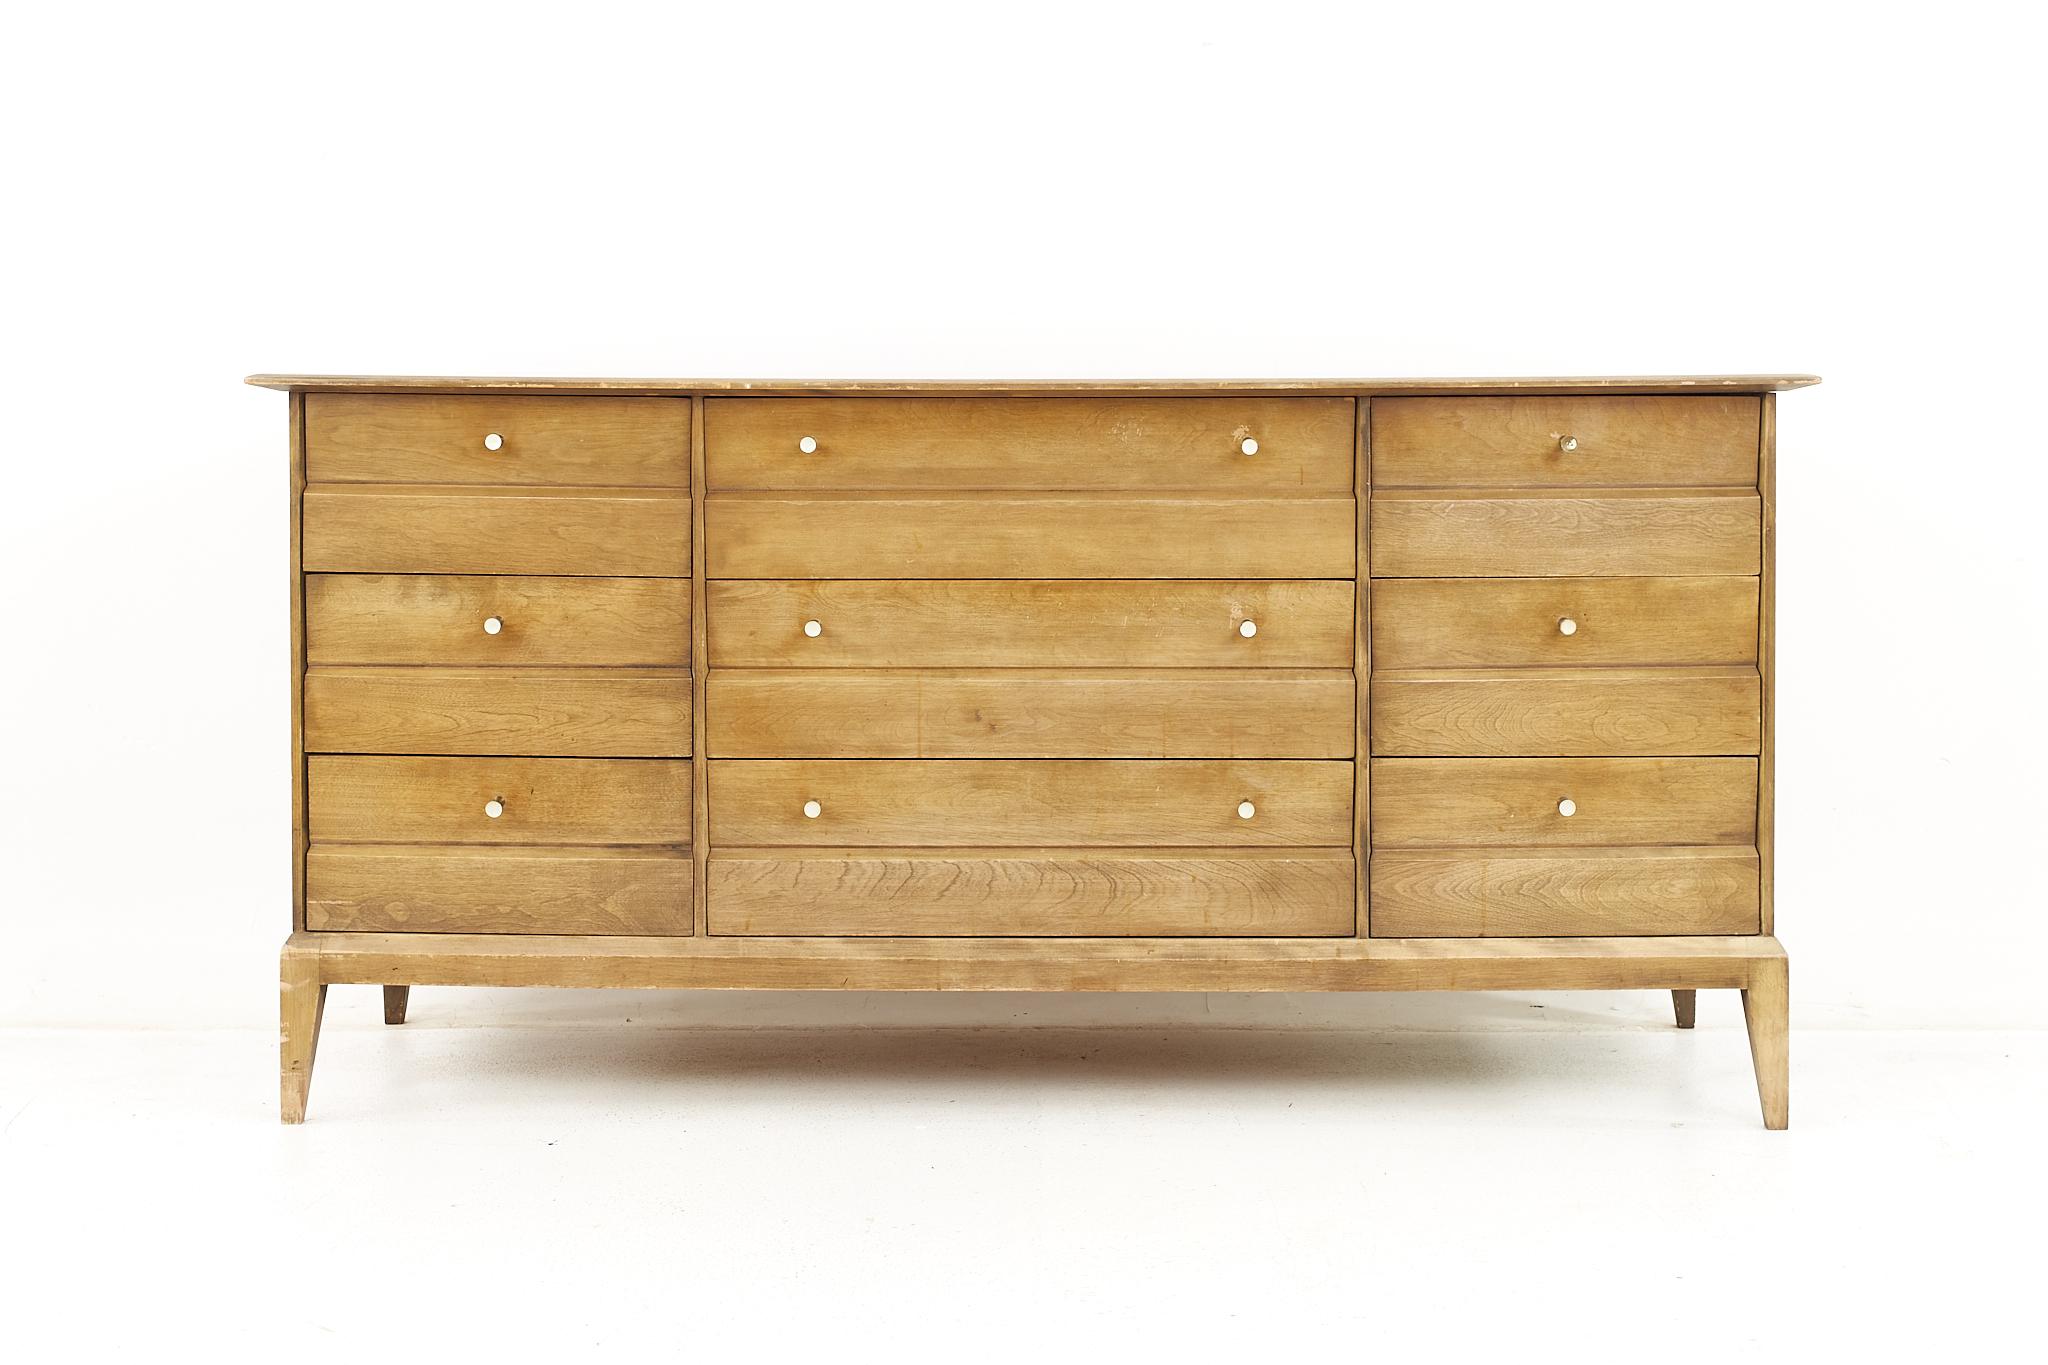 Heywood Wakefield mid century 9 drawer lowboy dresser

The dresser measures: 65 wide x 21.5 deep x 31.5 inches high

All pieces of furniture can be had in what we call restored vintage condition. That means the piece is restored upon purchase so